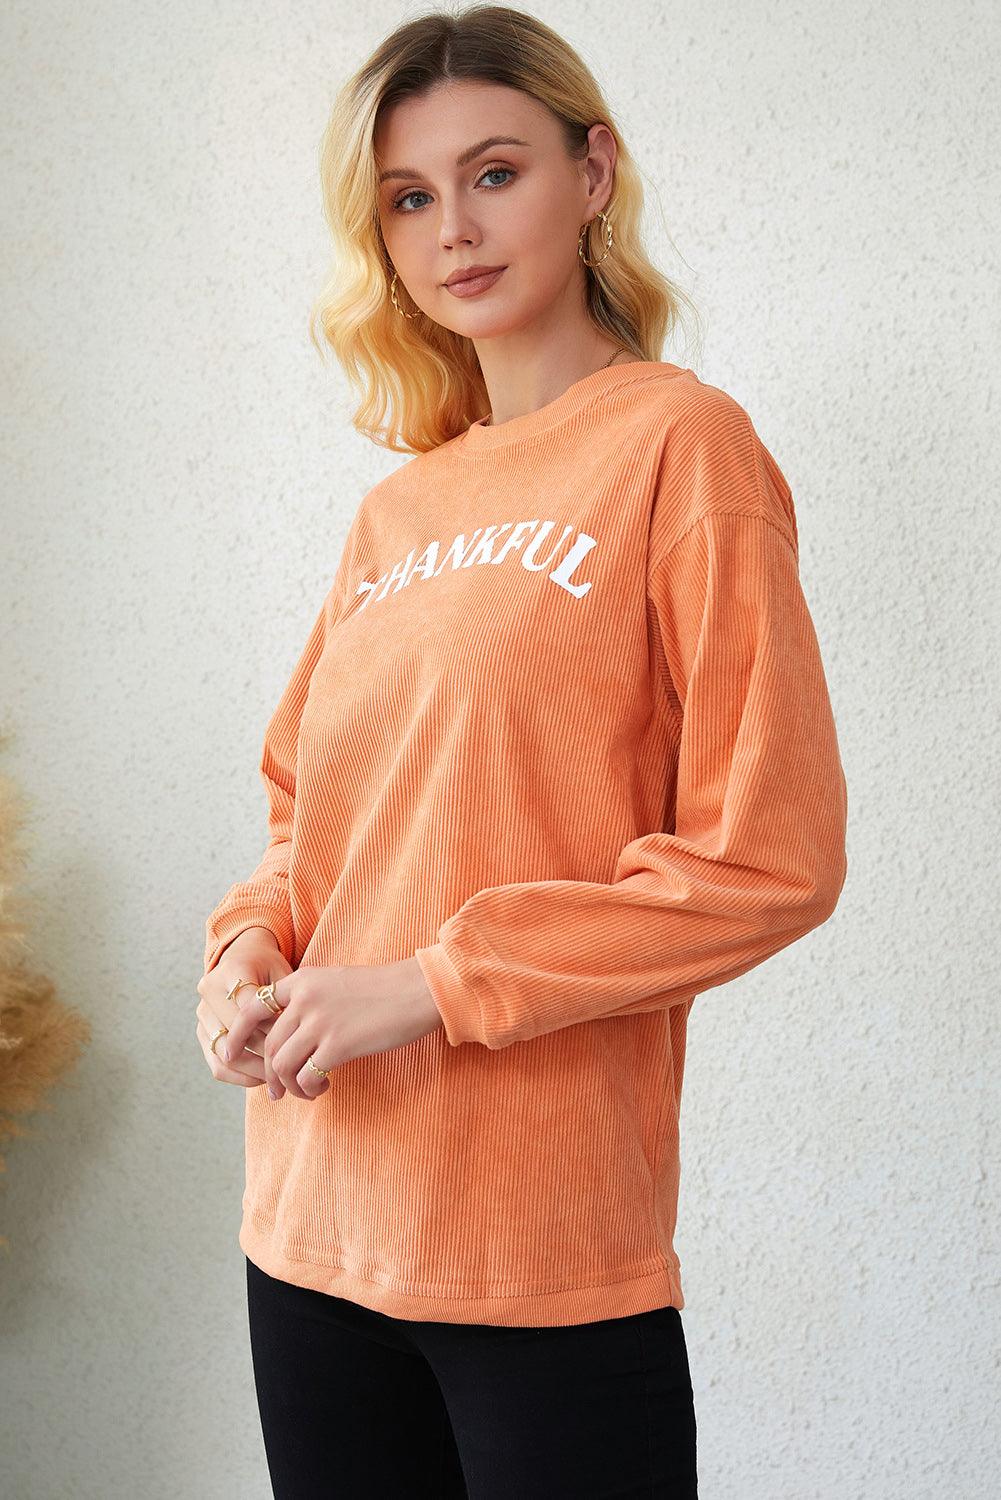 Round Neck Dropped Shoulder THANKFUL Graphic Sweatshirt - Crazy Like a Daisy Boutique #